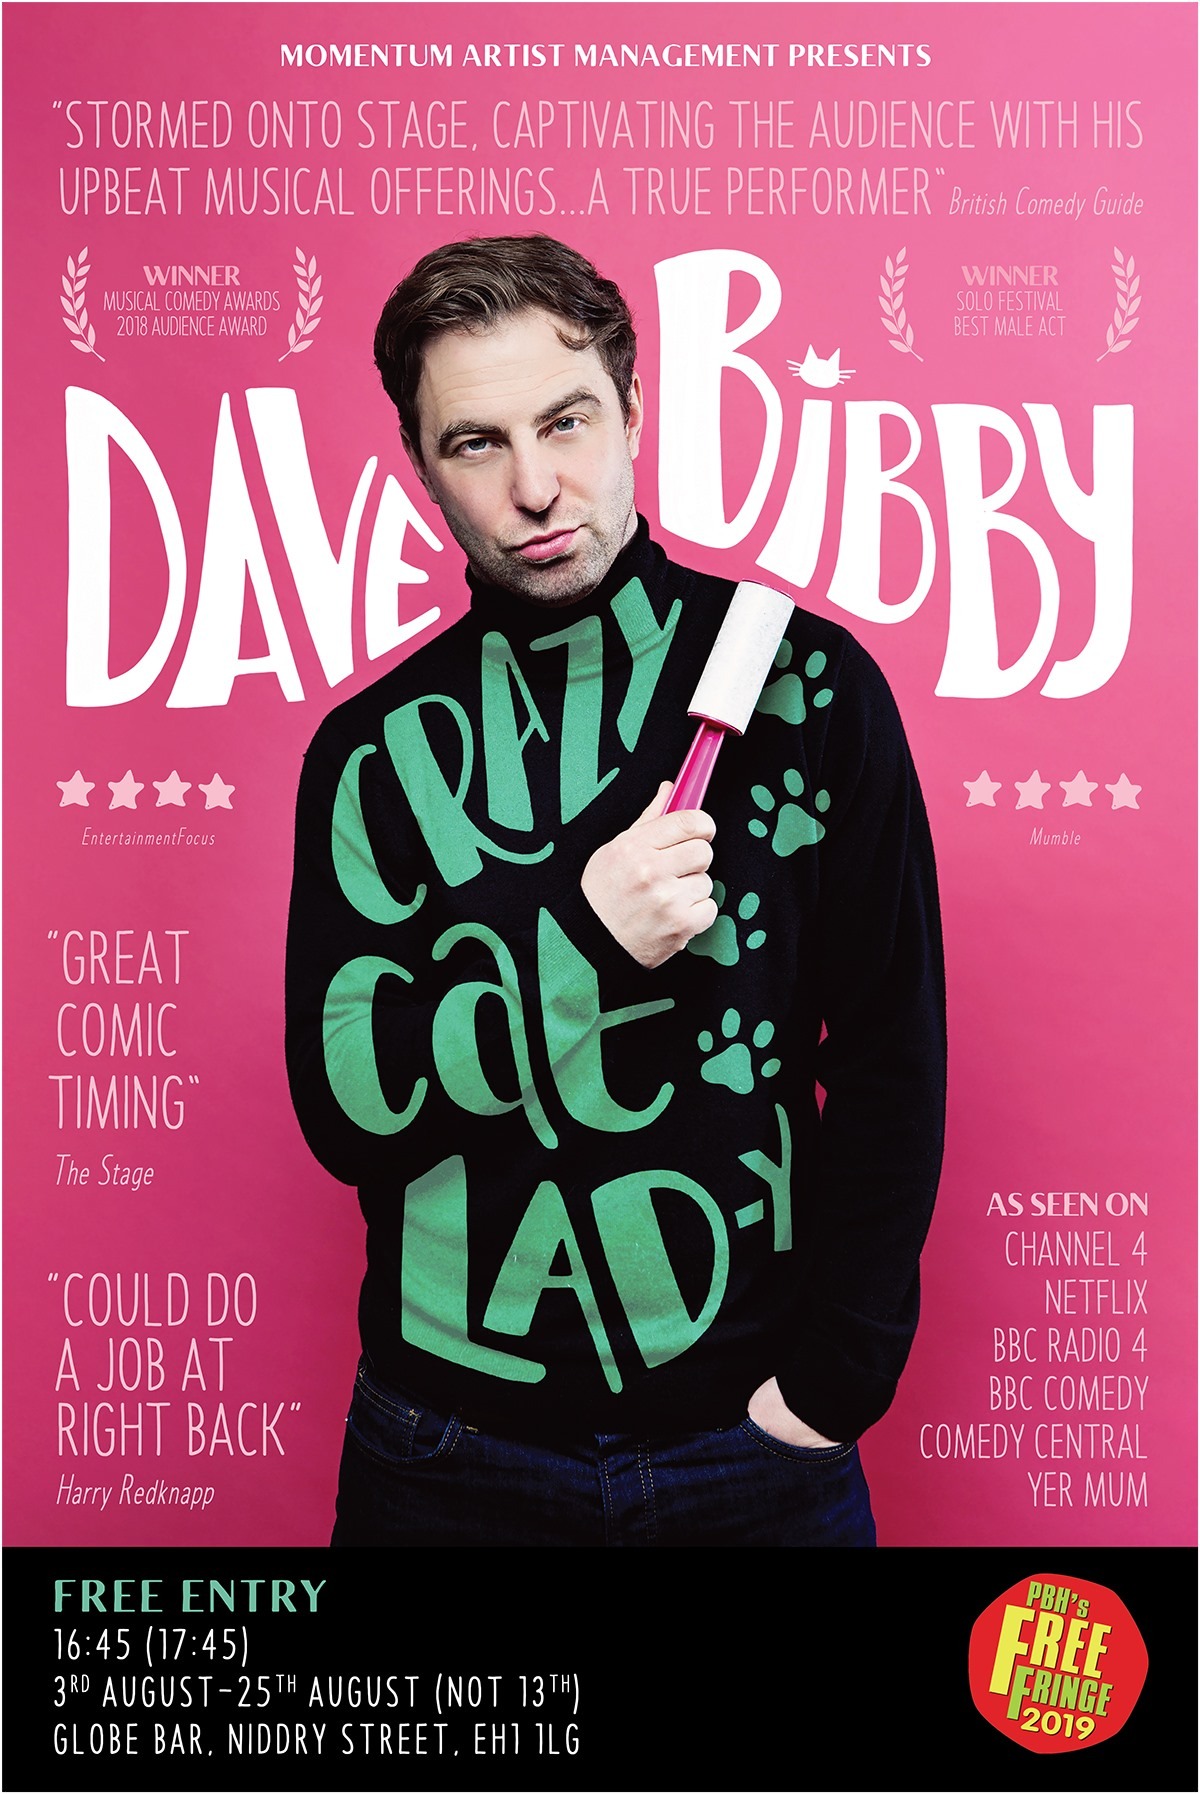 The poster for Dave Bibby: Crazy Cat Lad-y